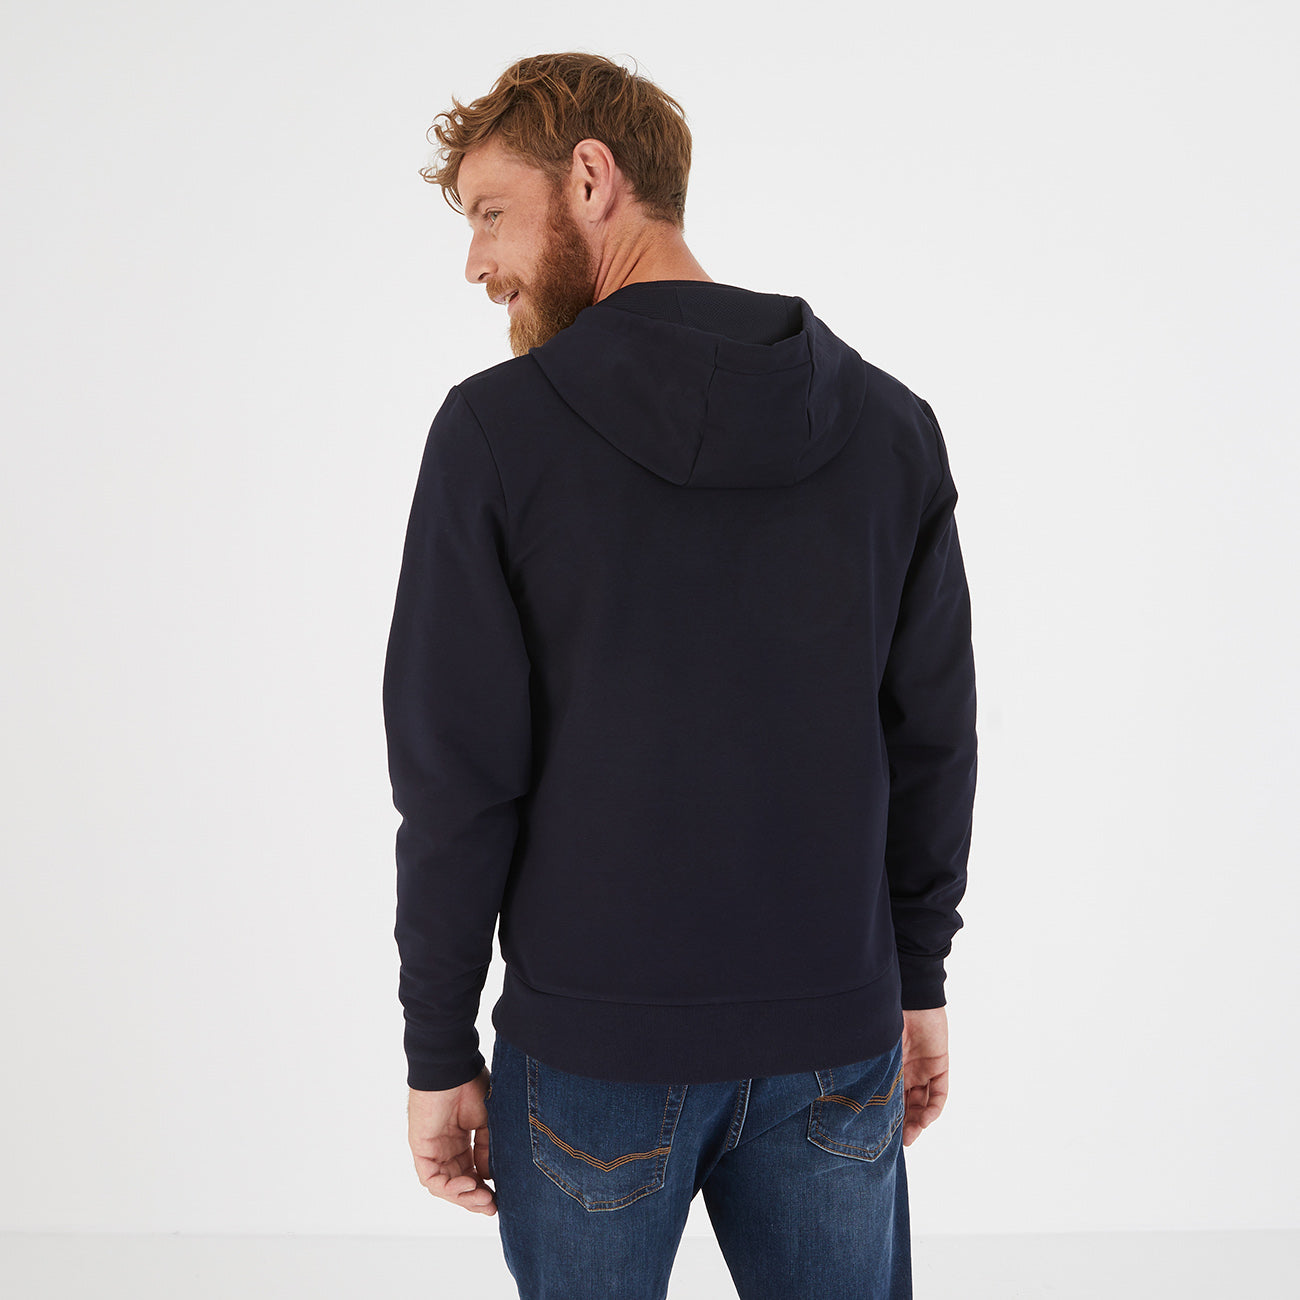 Eden Park Dark Blue Sweatshirt Style Jacket made from cotton jersey and water resistant fabric with a hood, available at StylishGuy Menswear Dublin